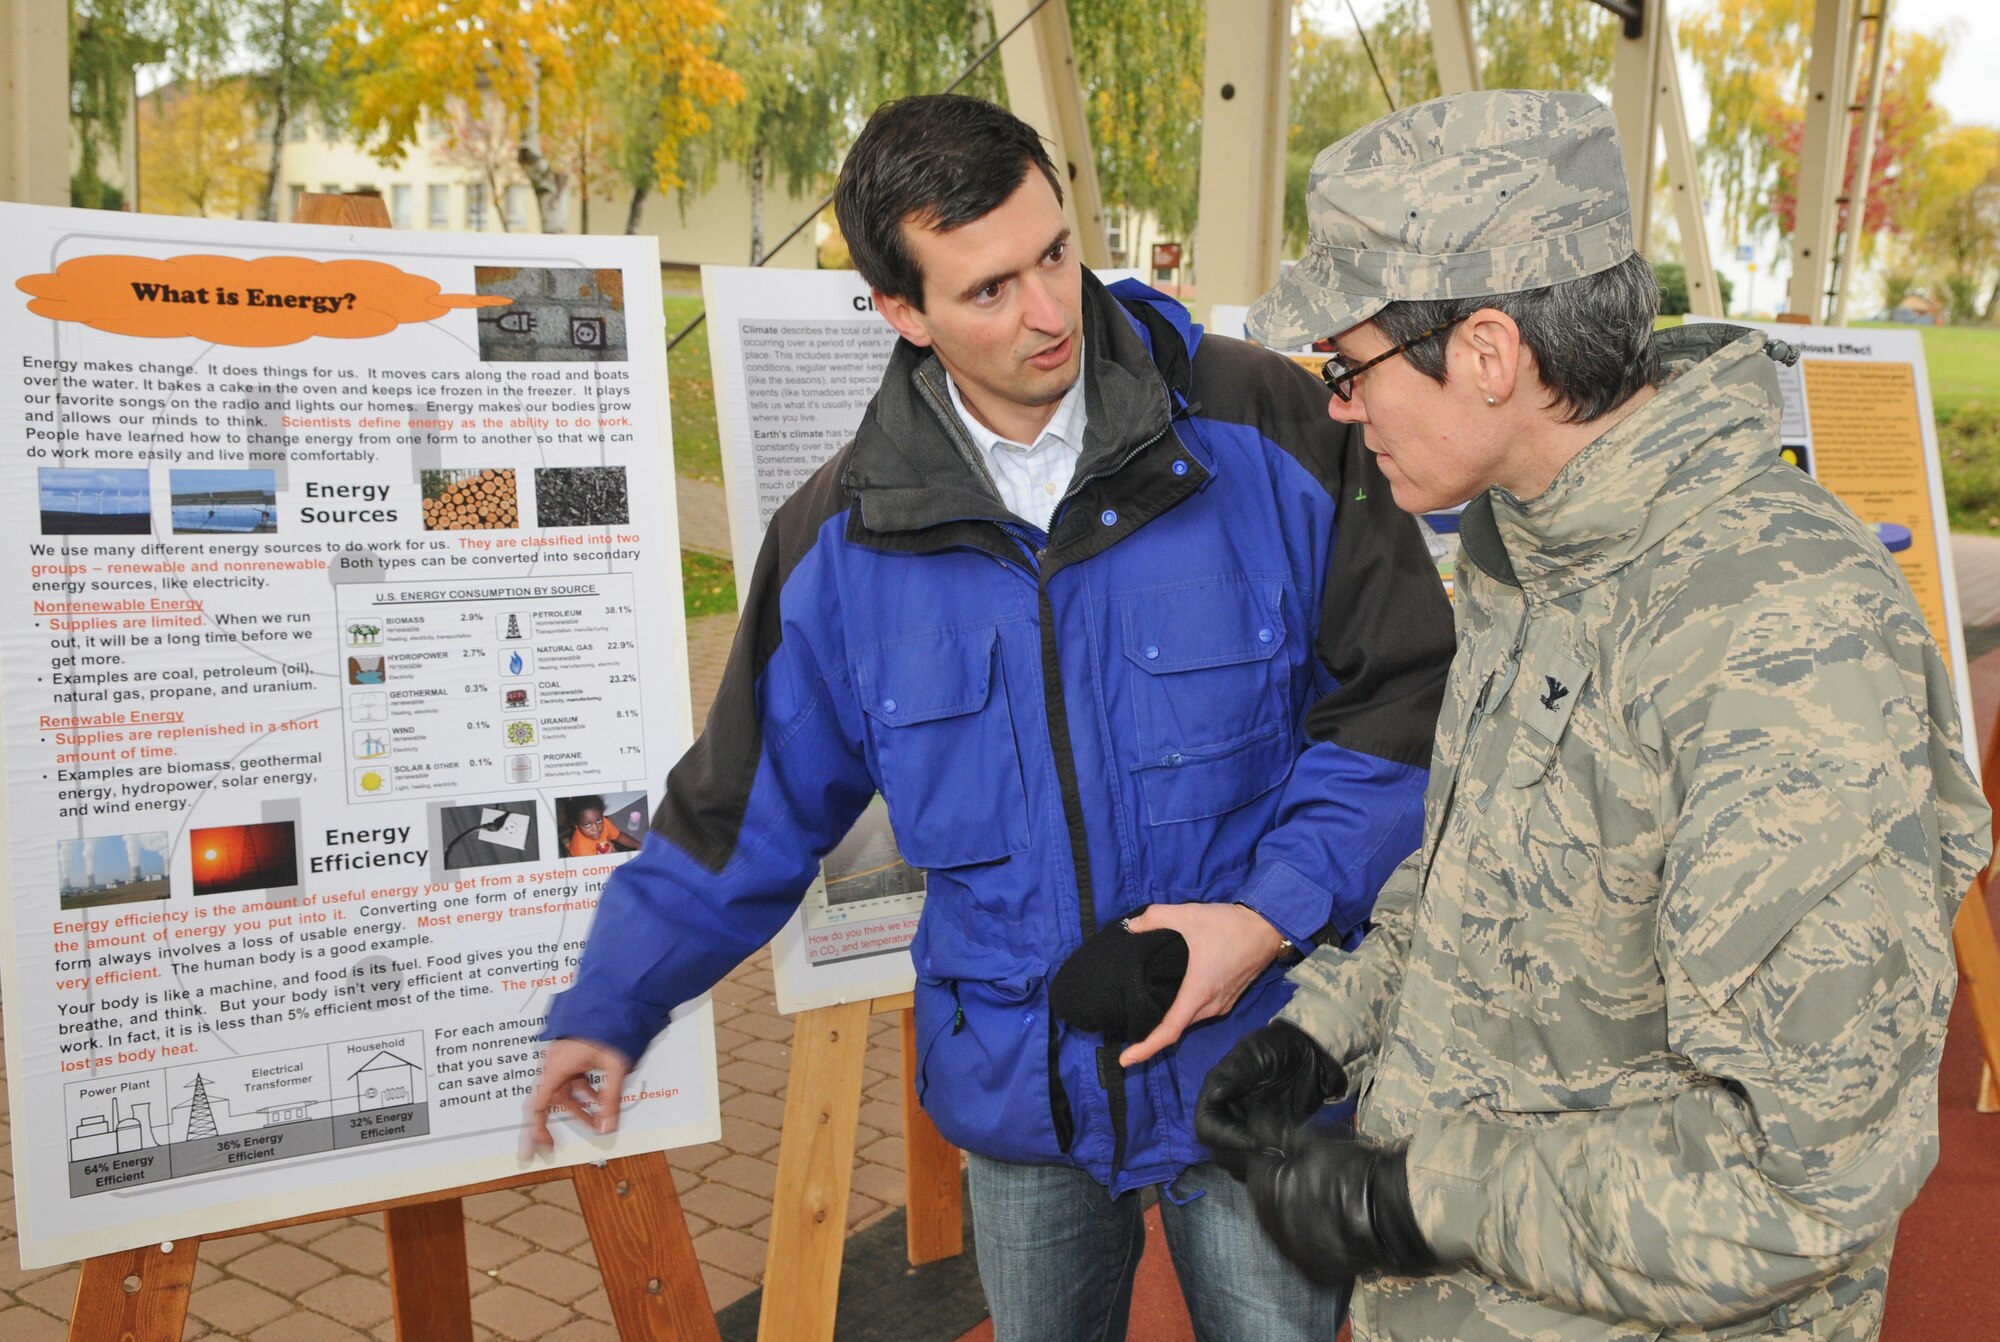 SPANGDAHLEM AIR BASE, Germany – Christian Turner, 52nd Civil Engineer Squadron pollution prevention program manager, speaks to Col. Jodine Tooke, 52nd Mission Support Group commander, about energy conservation during an Energy Awareness Month event Oct. 28 (U.S. Air Force photo/Senior Airman Nick Wilson)

